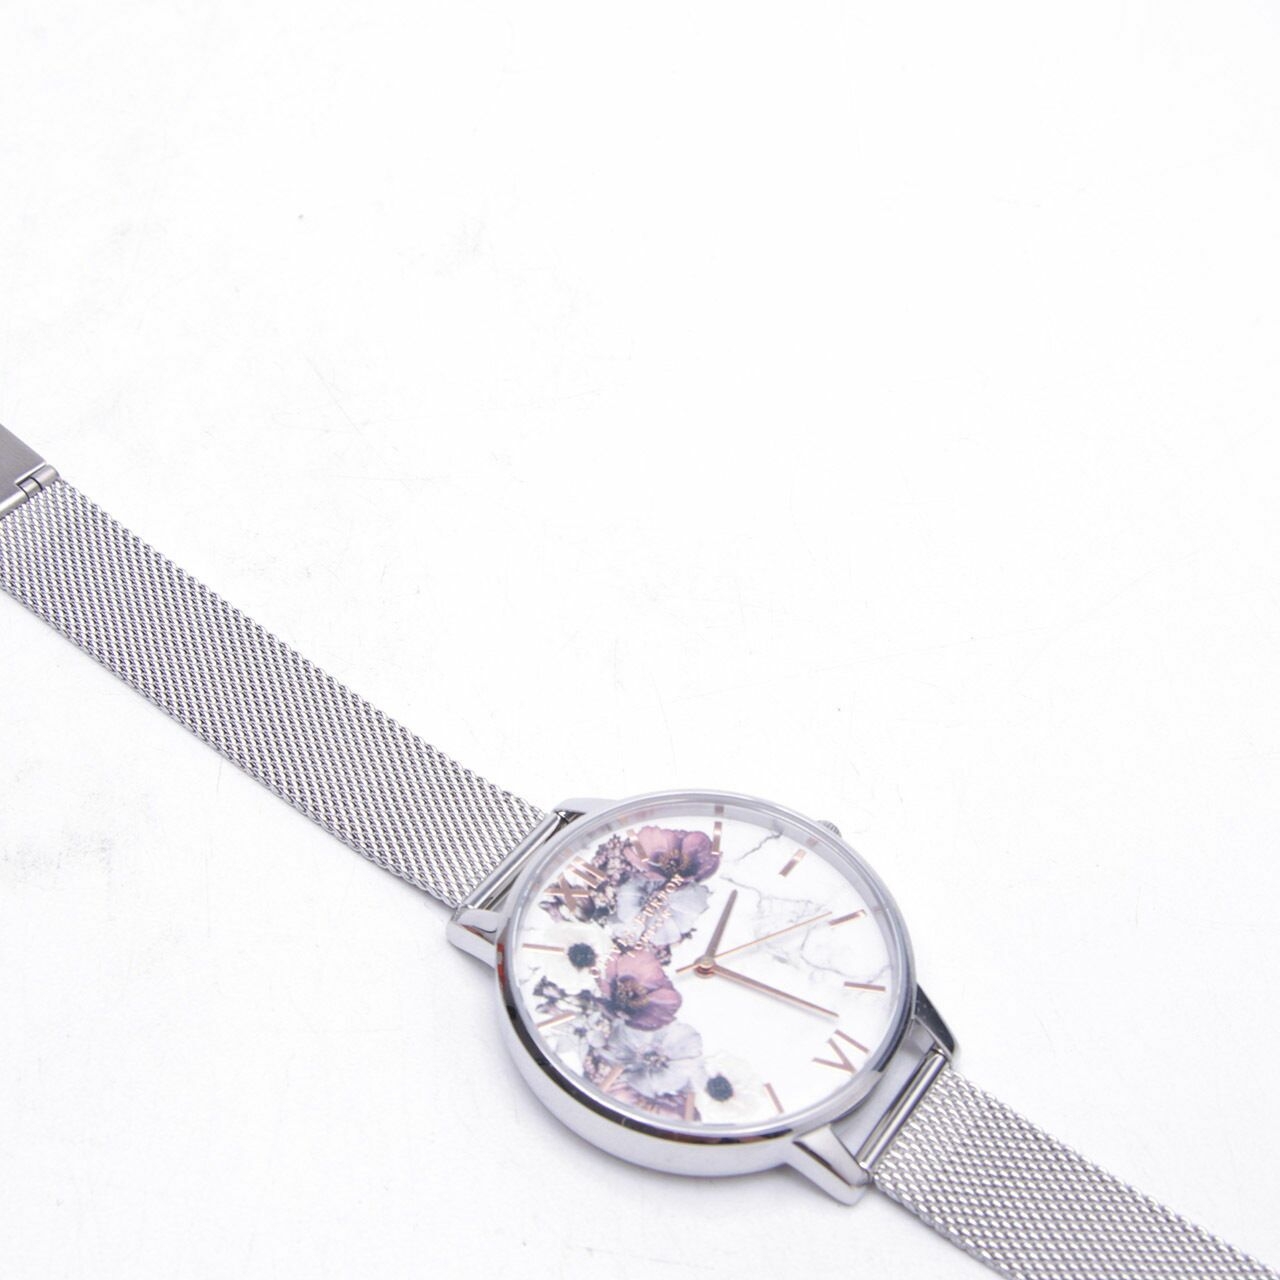 Olivia Burton Marble Floral Silver Mesh & Rose Gold Watch